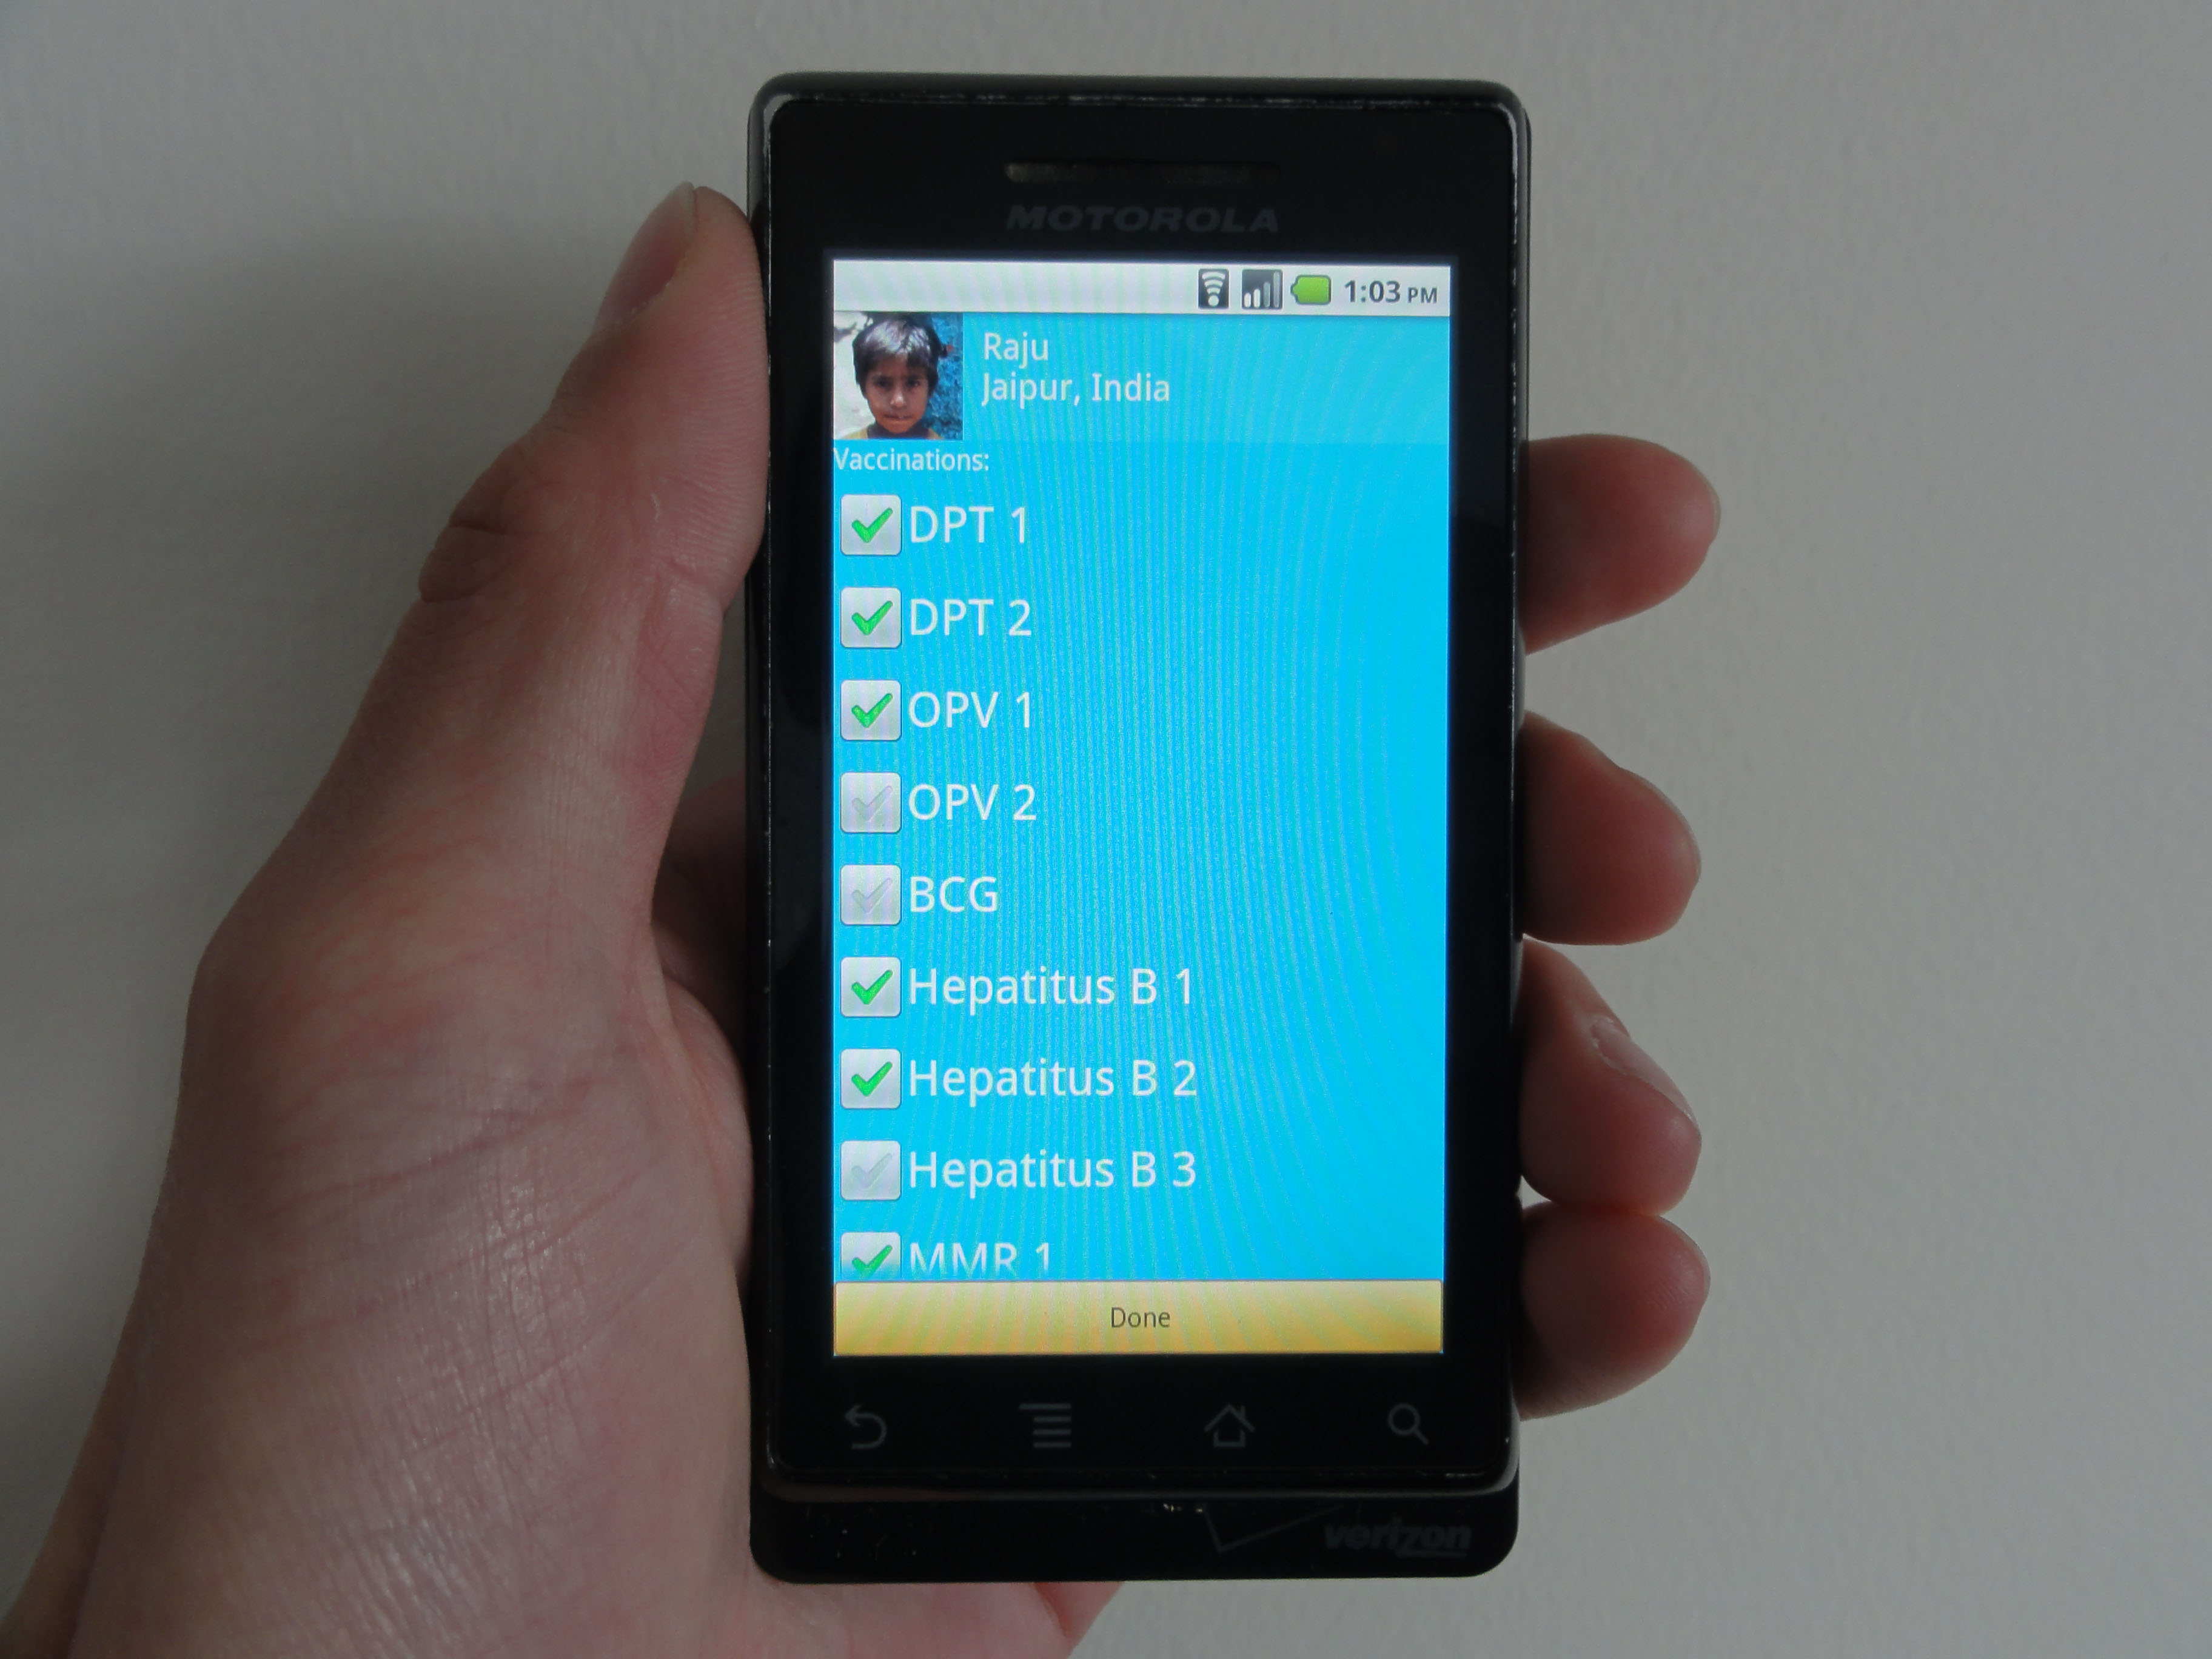 A view of the application on a smart phone